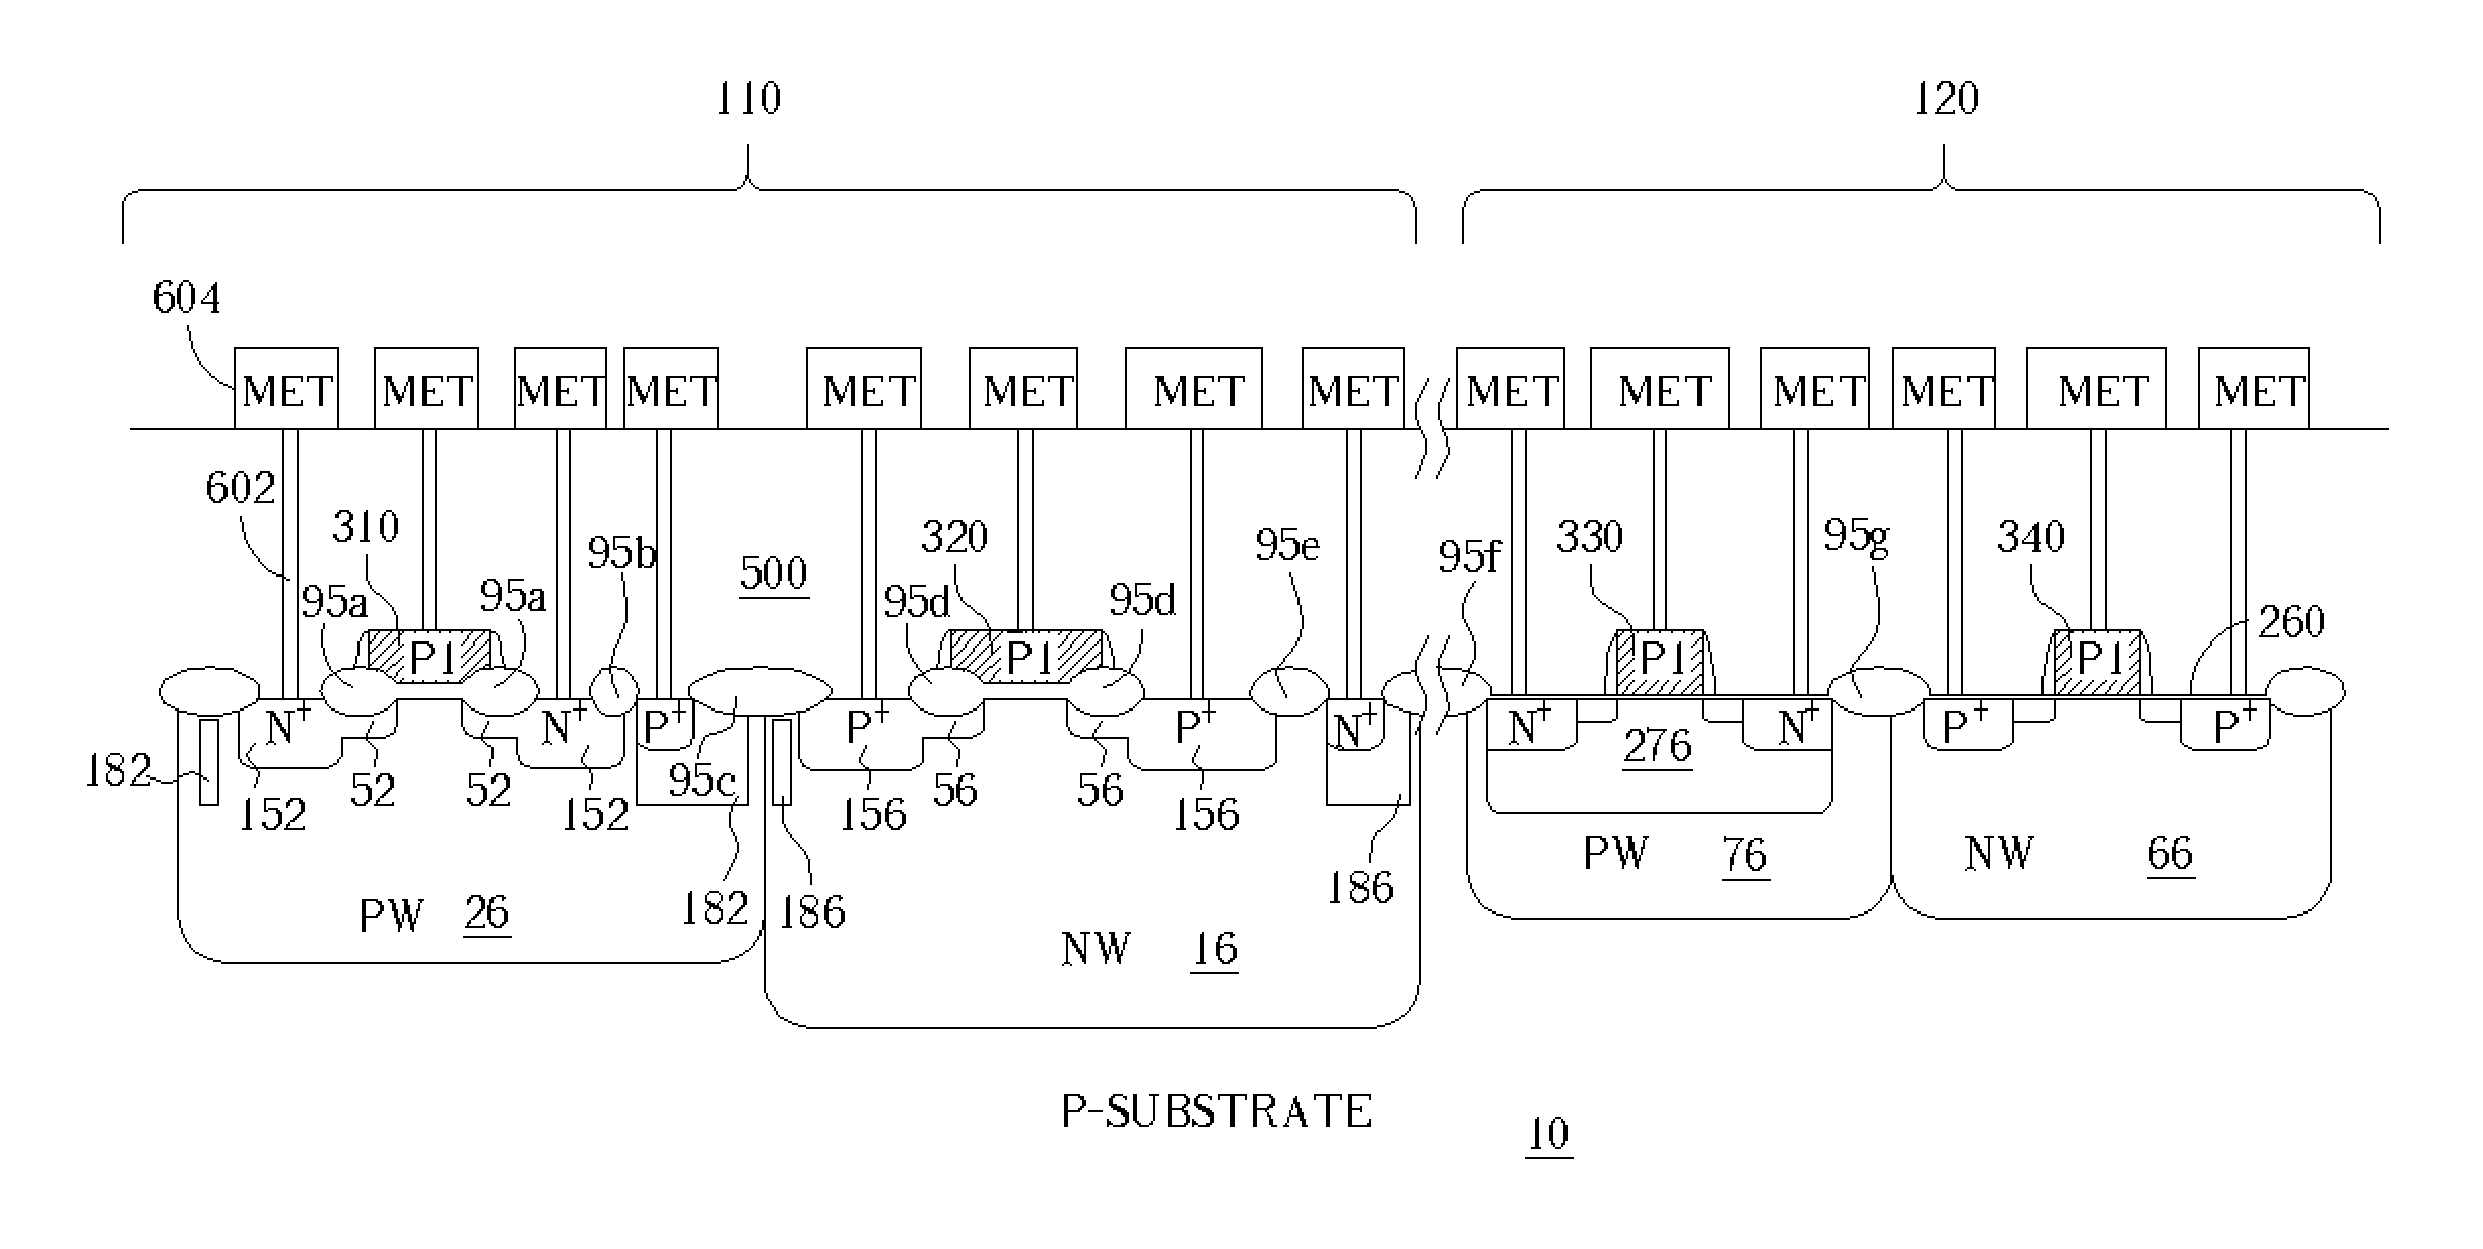 Method for fabricating integrated circuits having both high voltage and low voltage devices